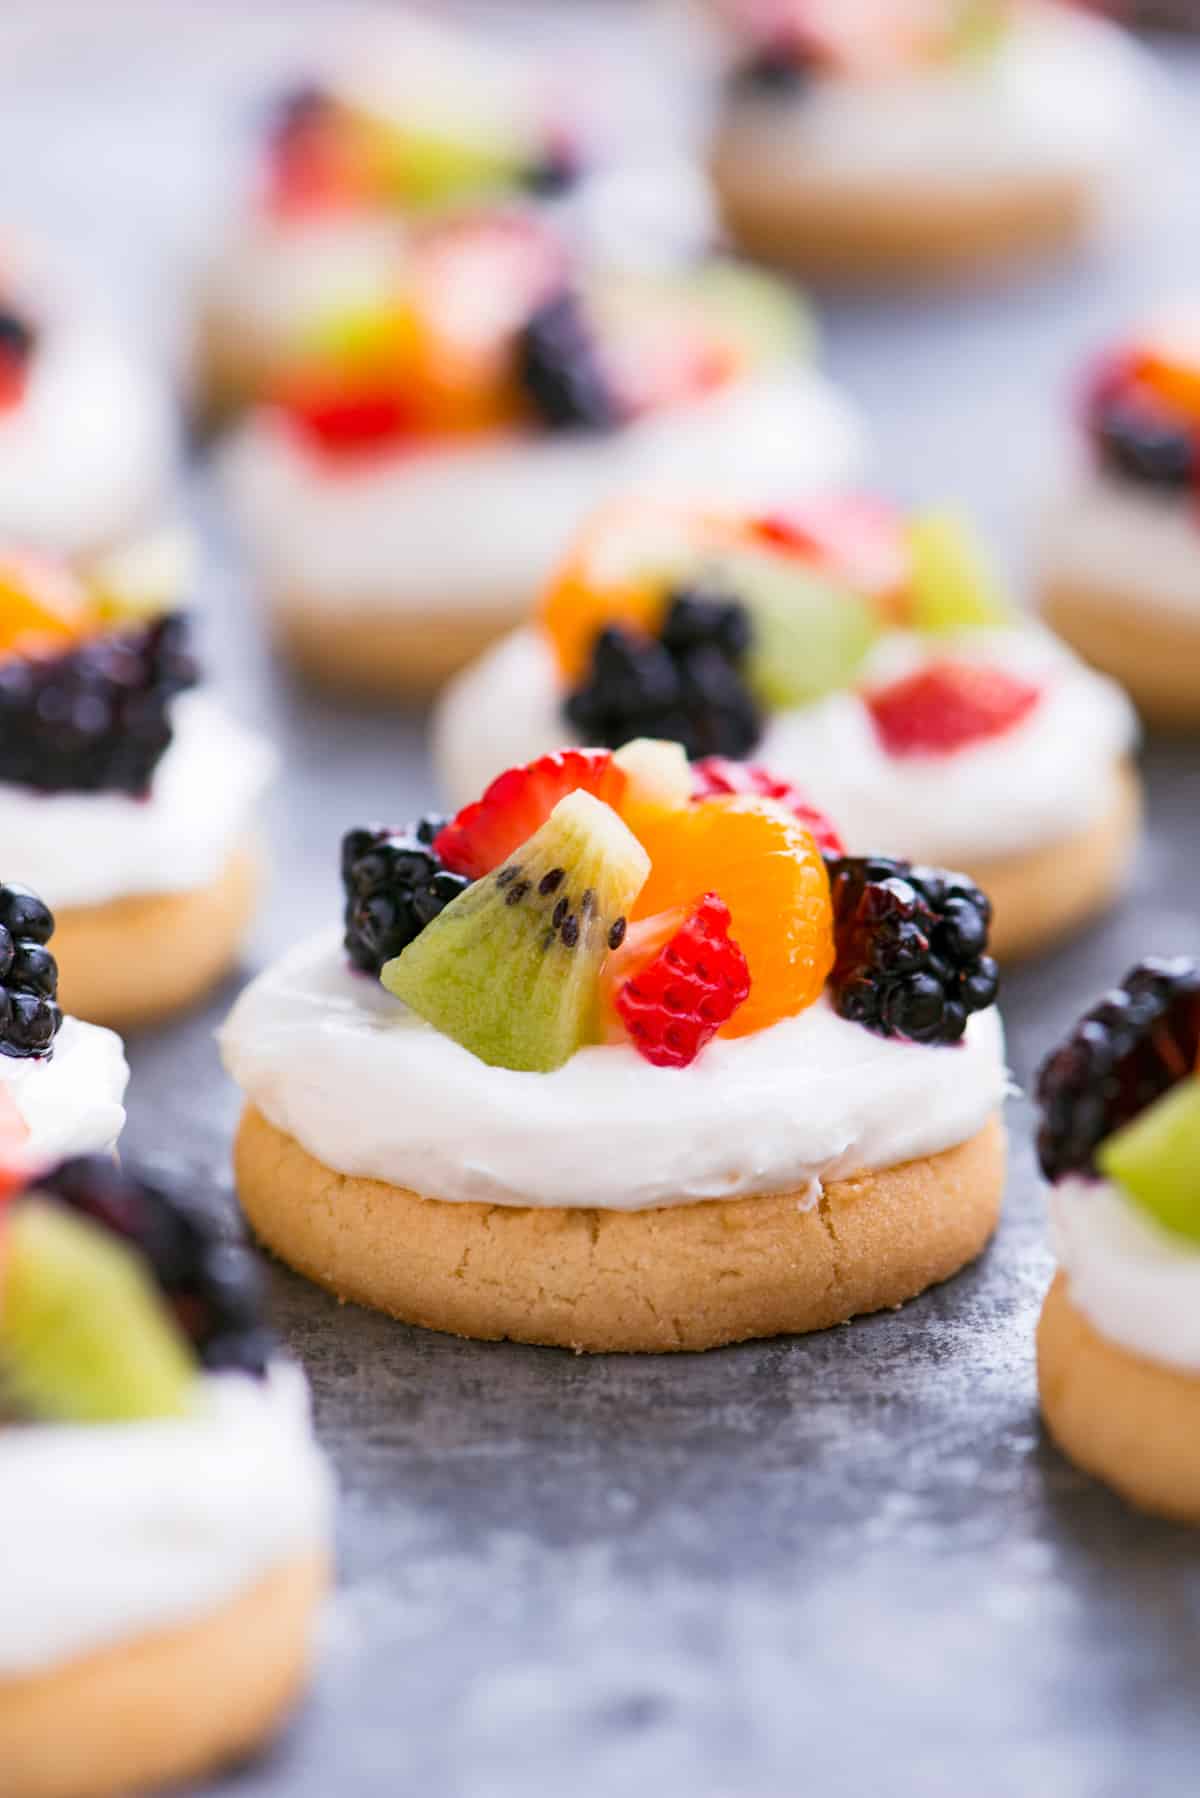 Mini fruit pizza with frosting and diced fruit.